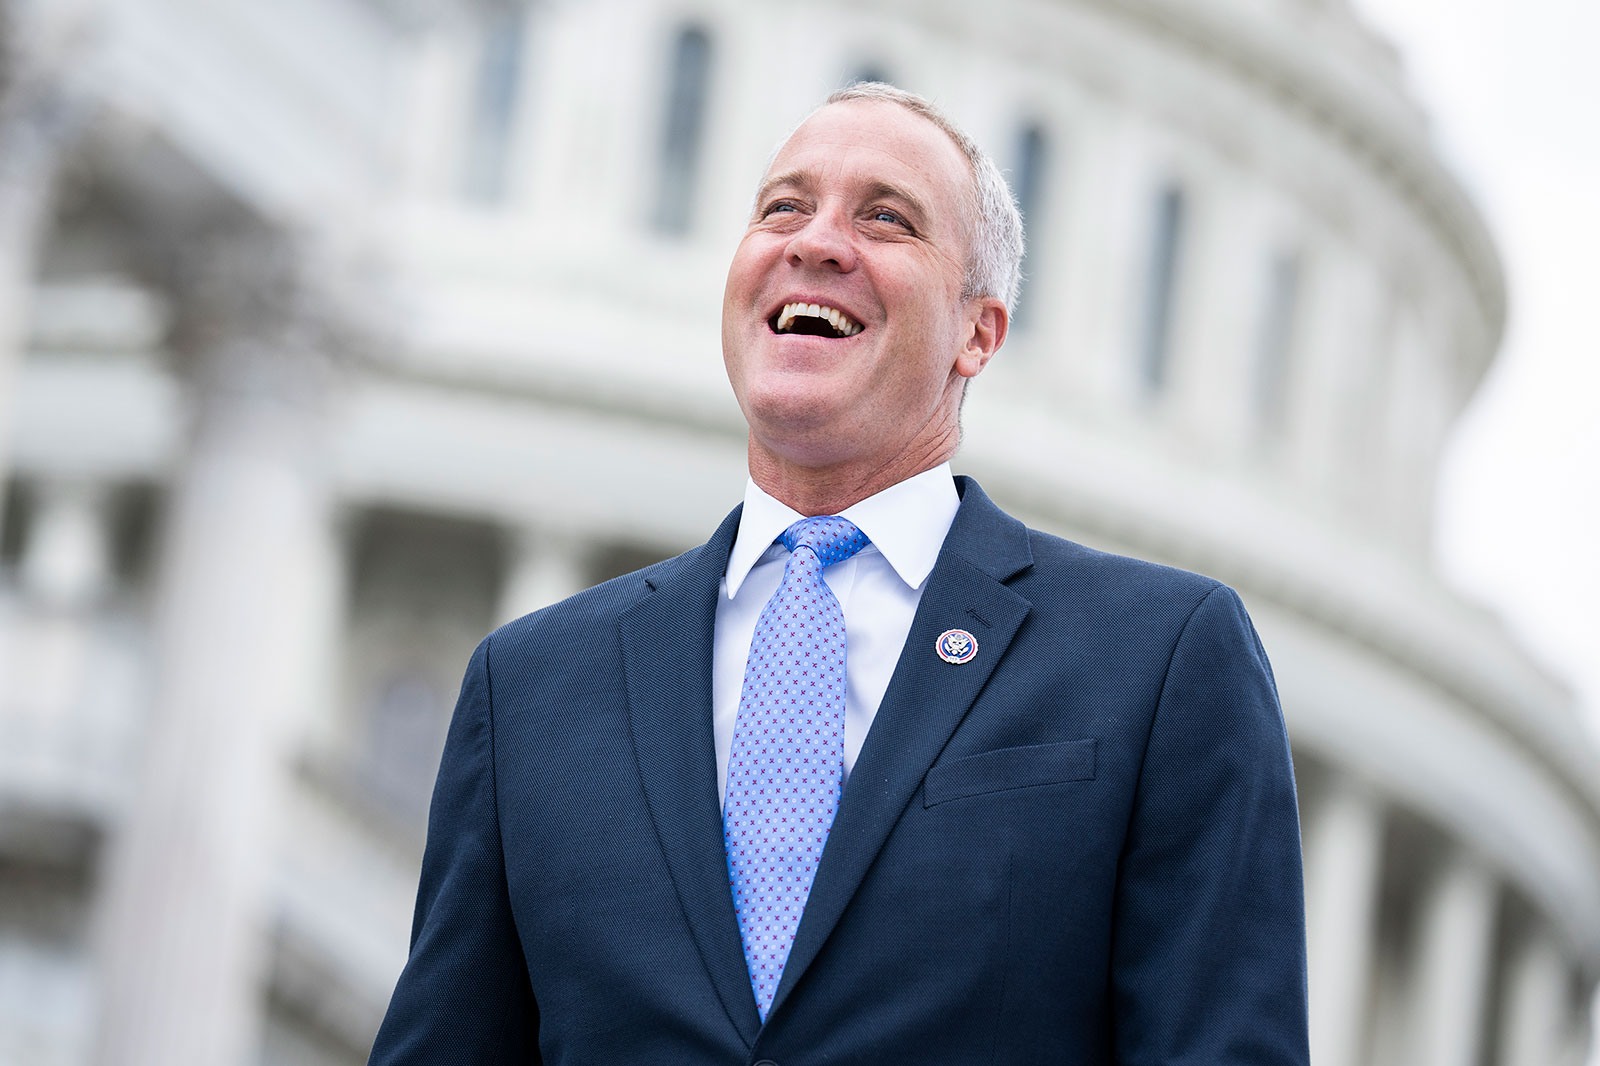 CNN Projection: Rep. Sean Patrick Maloney will win Democratic nomination for New York’s 17th District 